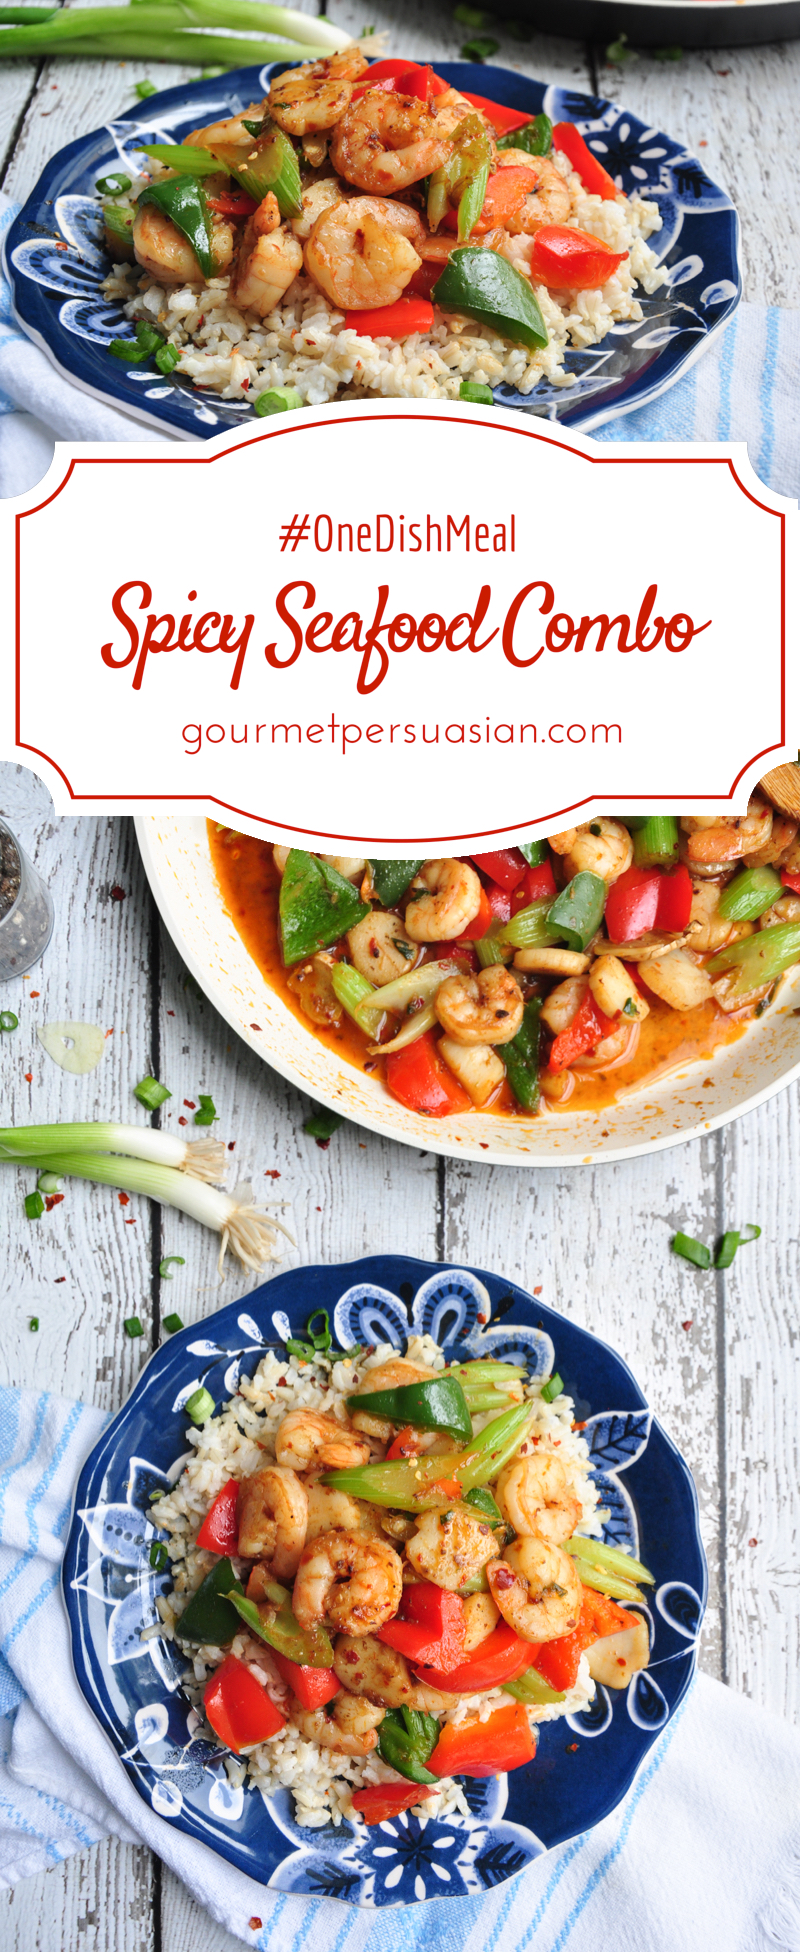 Super tasty and quick one-dish seafood combo that's ready in less than 30 minutes!